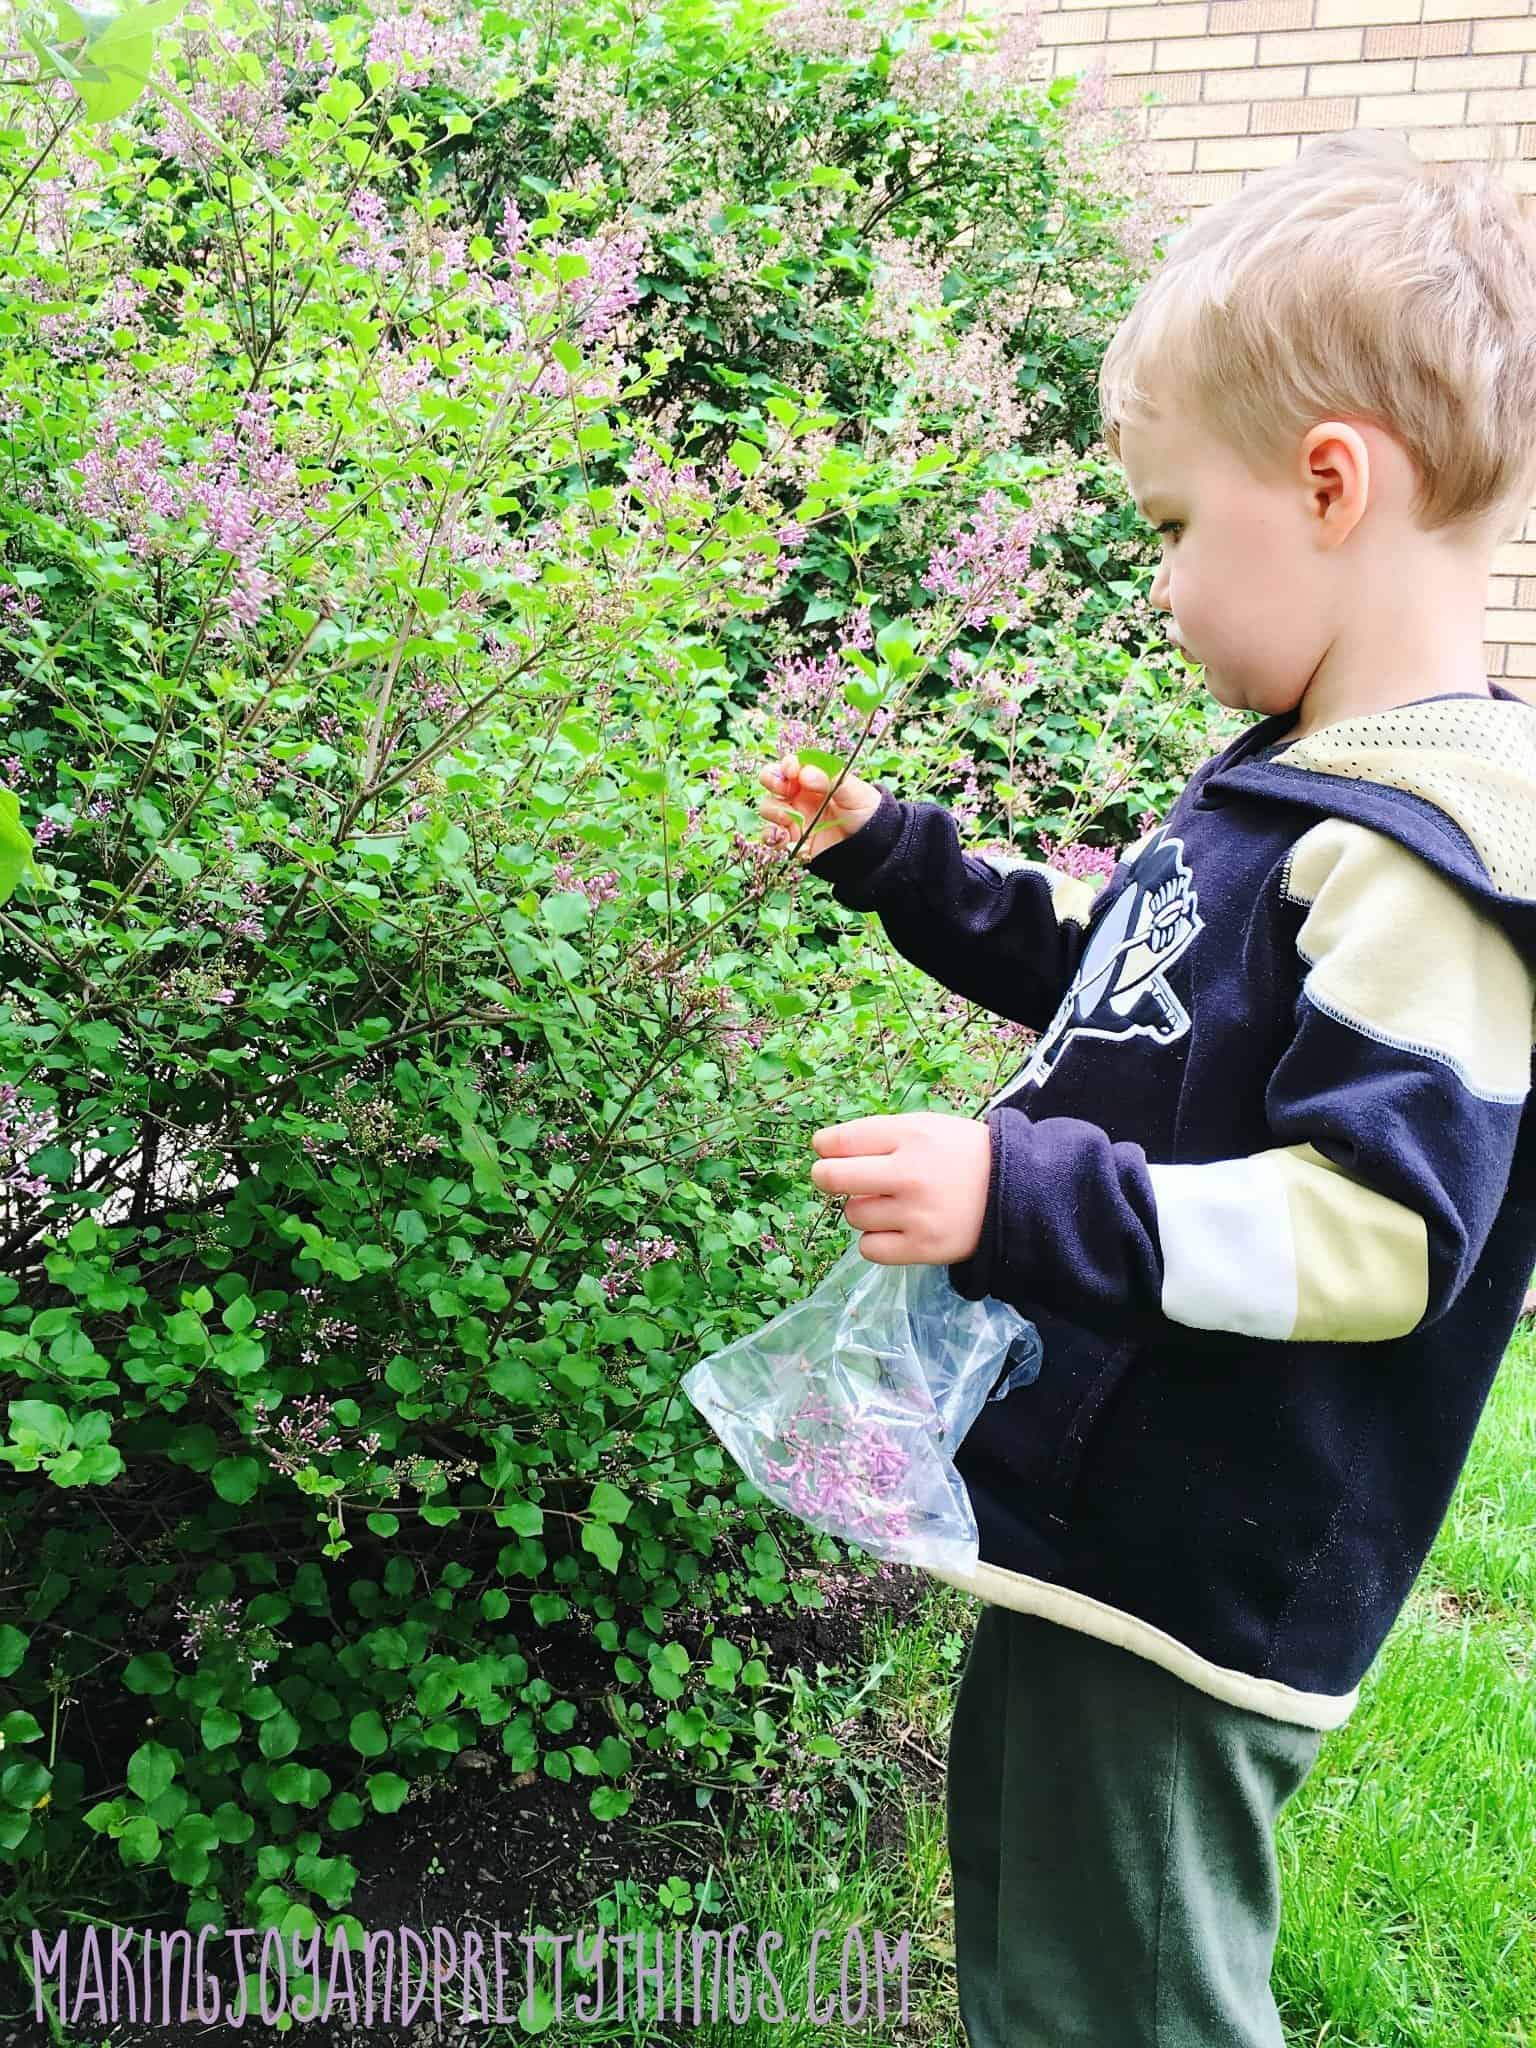 A little boy in a navy blue, tan, and white sweatshirt stands in front of a bush with purple flowers. He is picking flower petals and putting them in a small plastic bag to make a DIY pressed flower suncatcher craft.